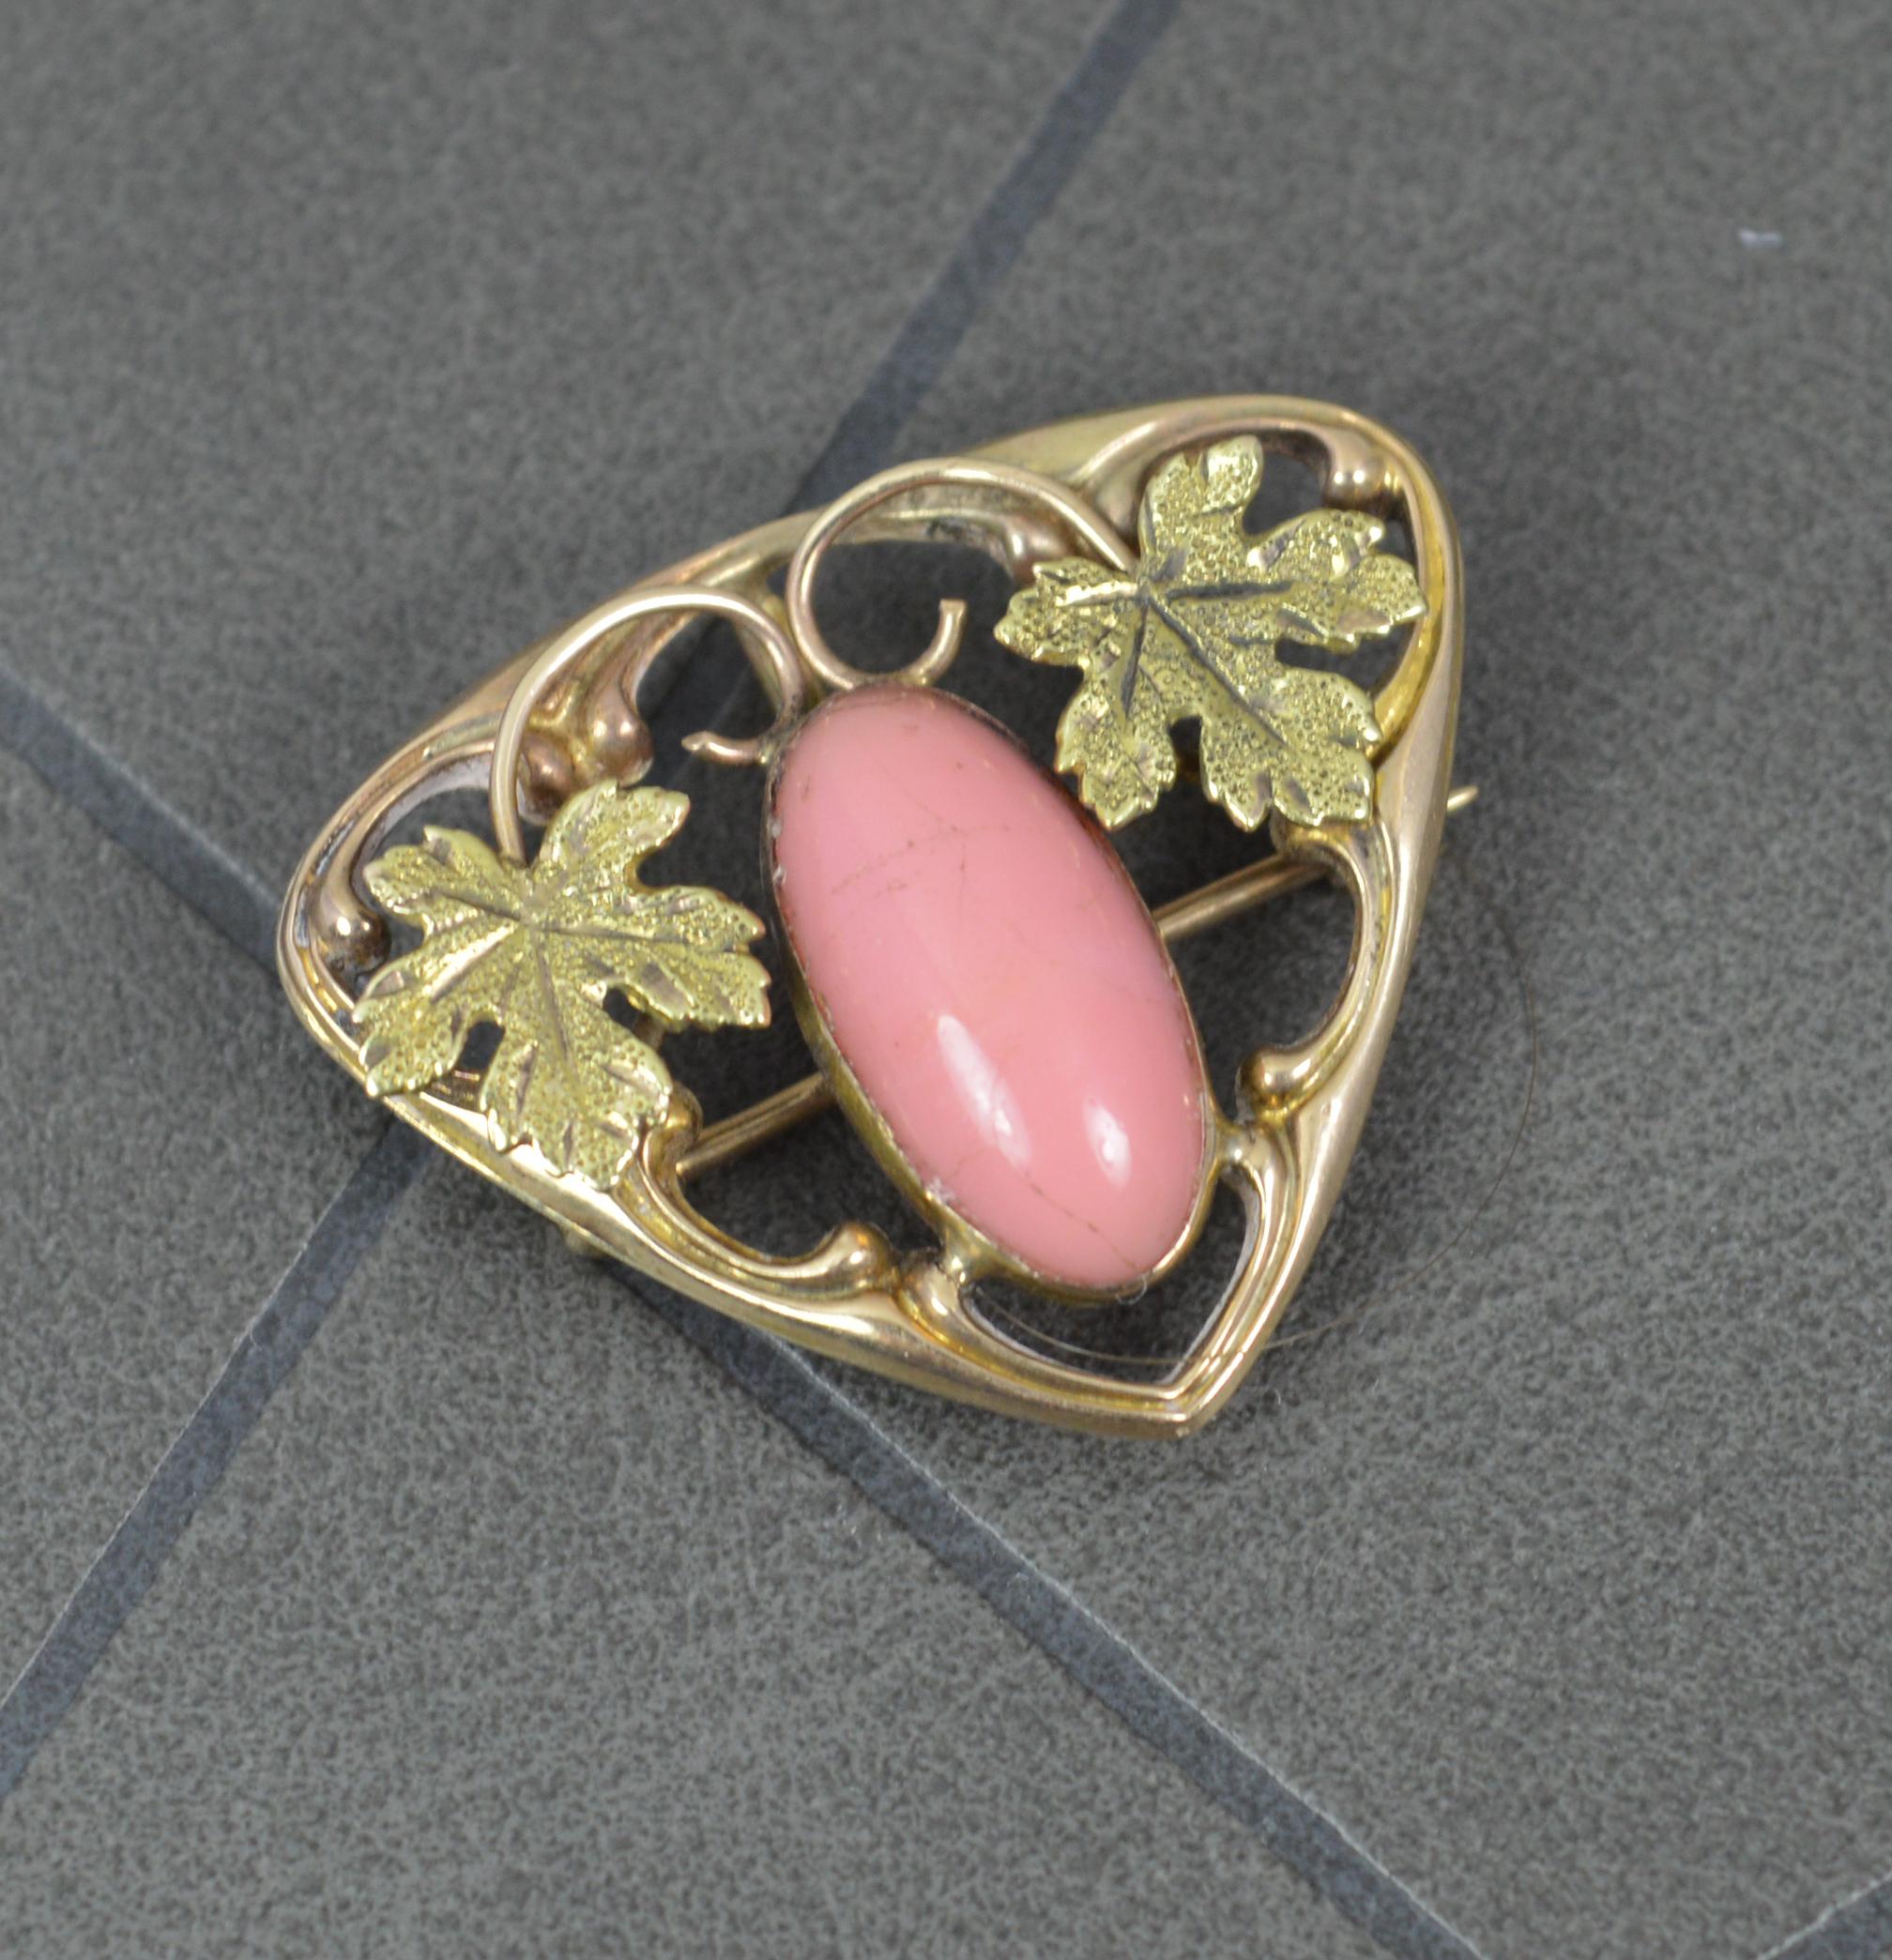 A beautiful true antique brooch circa 1900.
10 carat gold bar brooch.
Set with an oval shaped coral to centre with an engraved leaf to each side and a triangular shape.
2.9 grams, 27mm x 23mm approx

Condition ; Excellent. Crisp design and well set